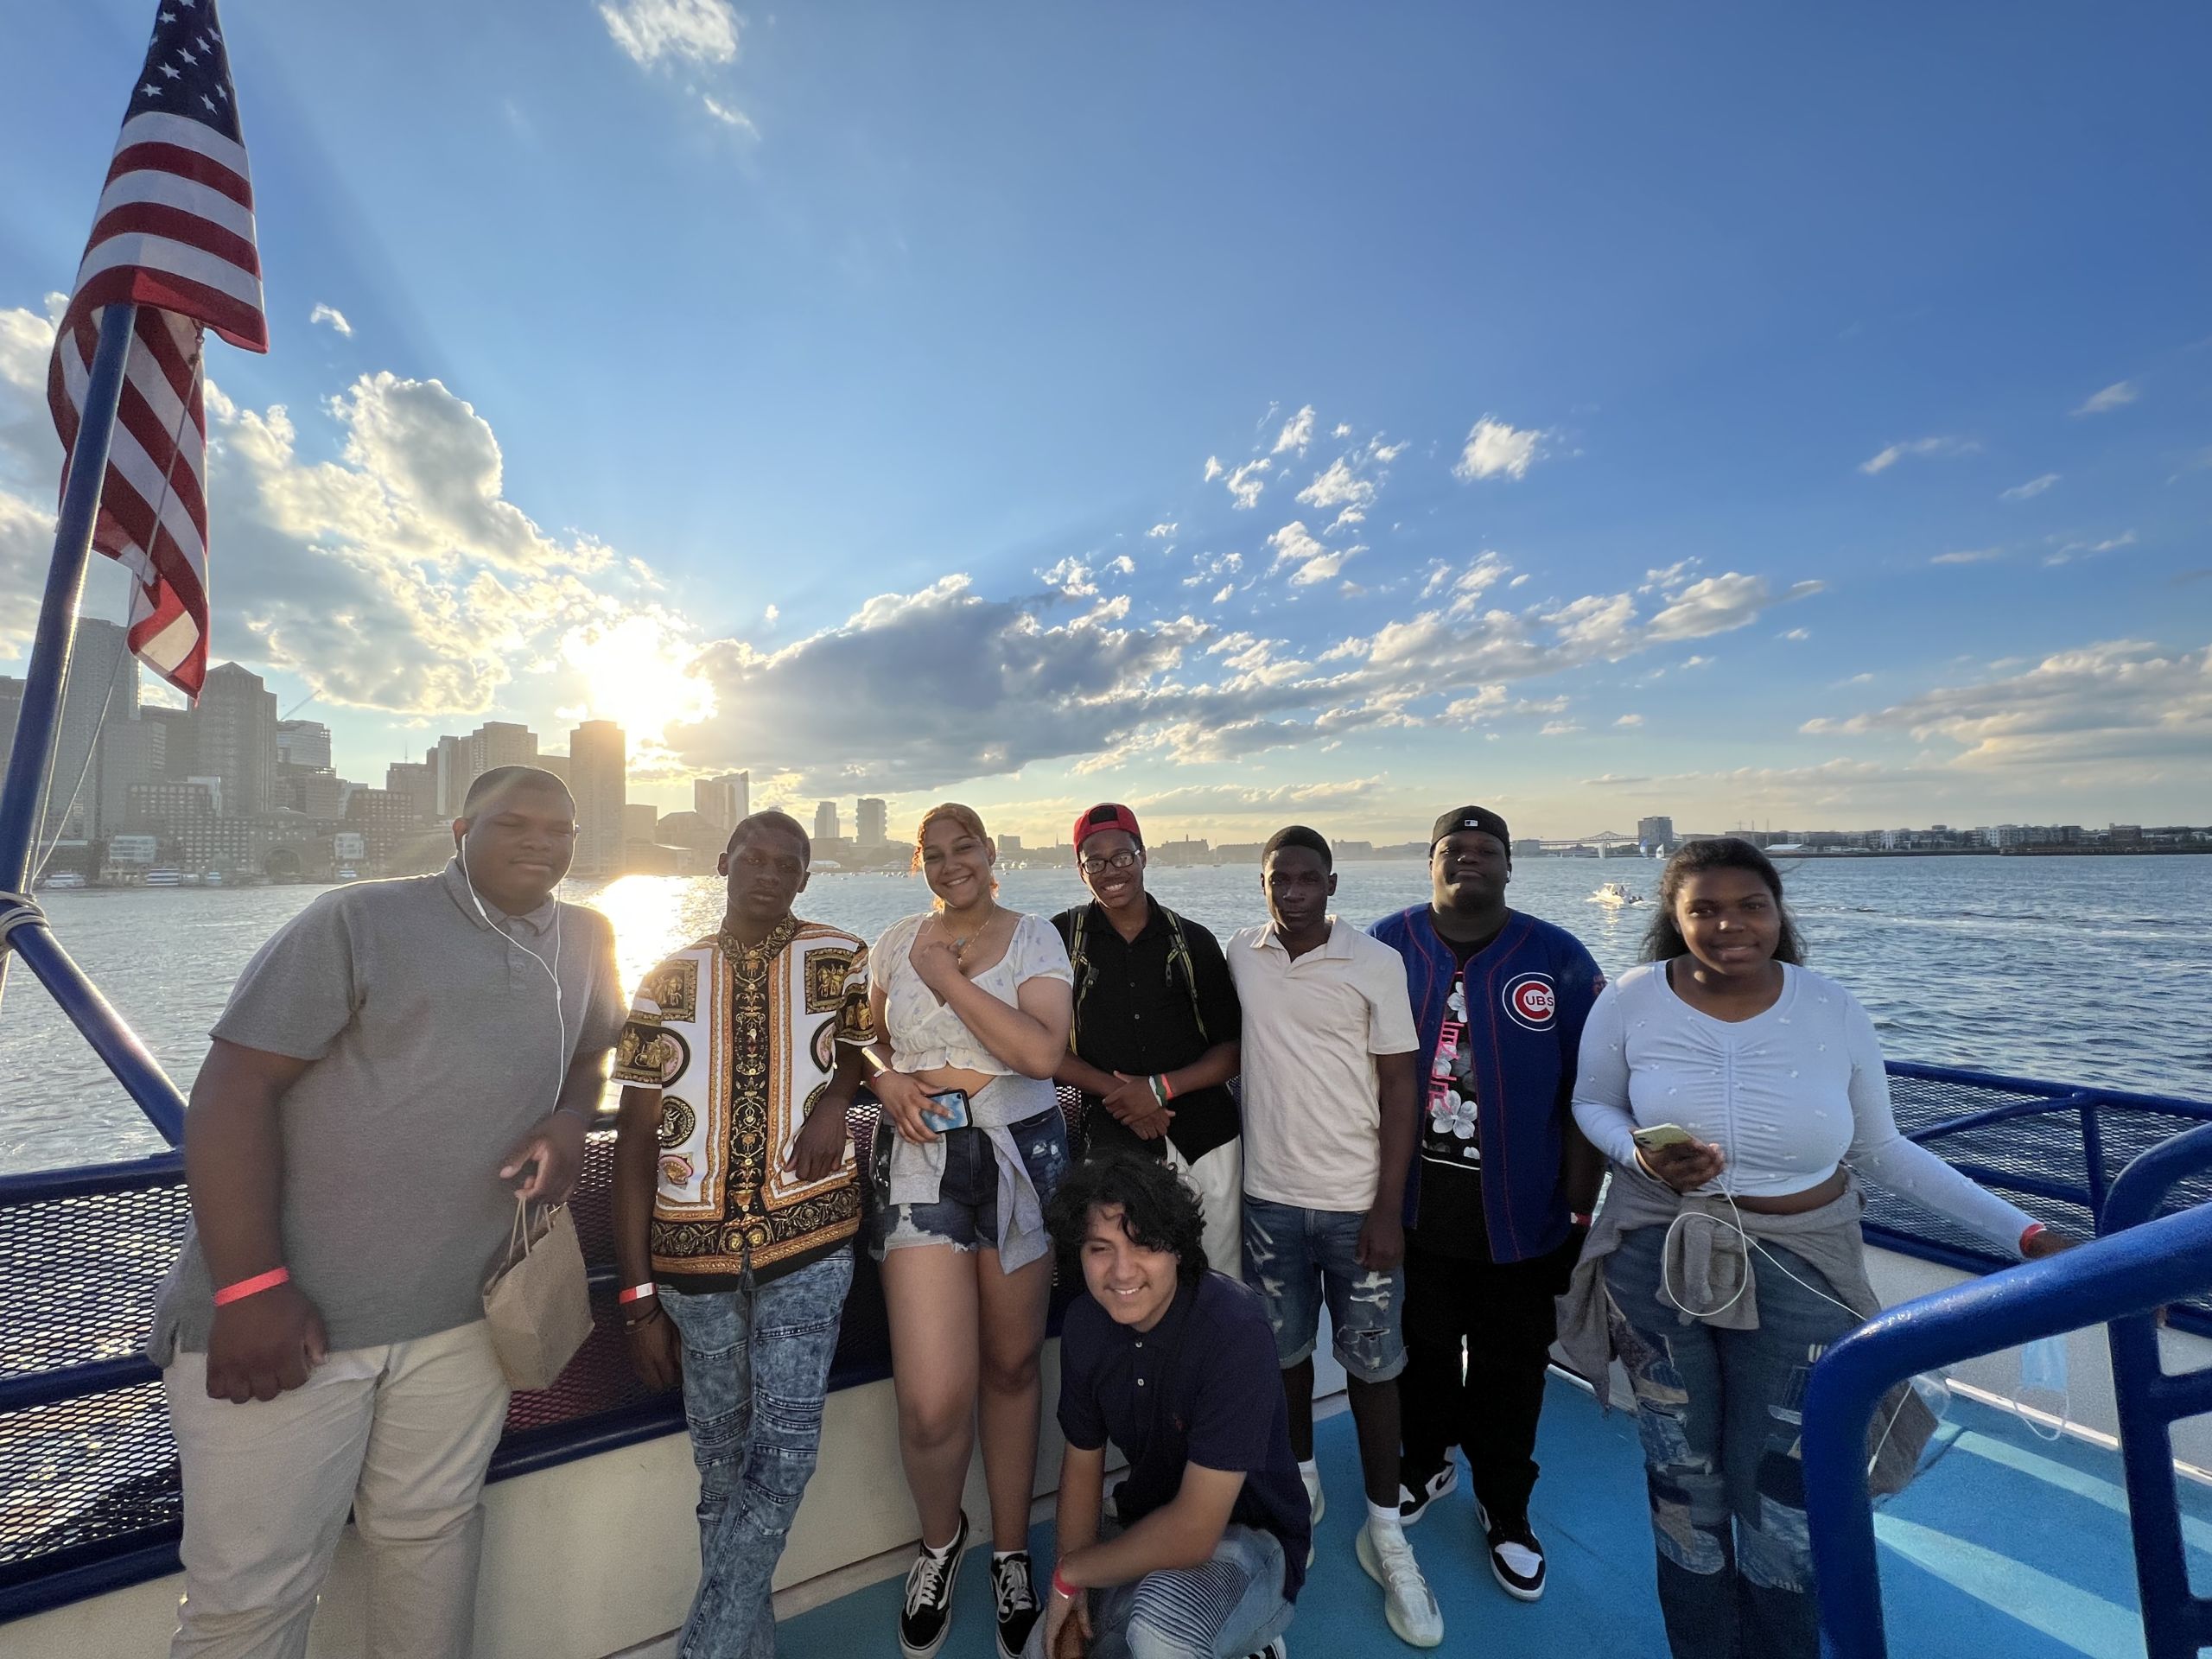 Photo shows Brianna Dekrines and her Baker College Prep peers on a boat in Boston Harbor during their visit to Harvard University